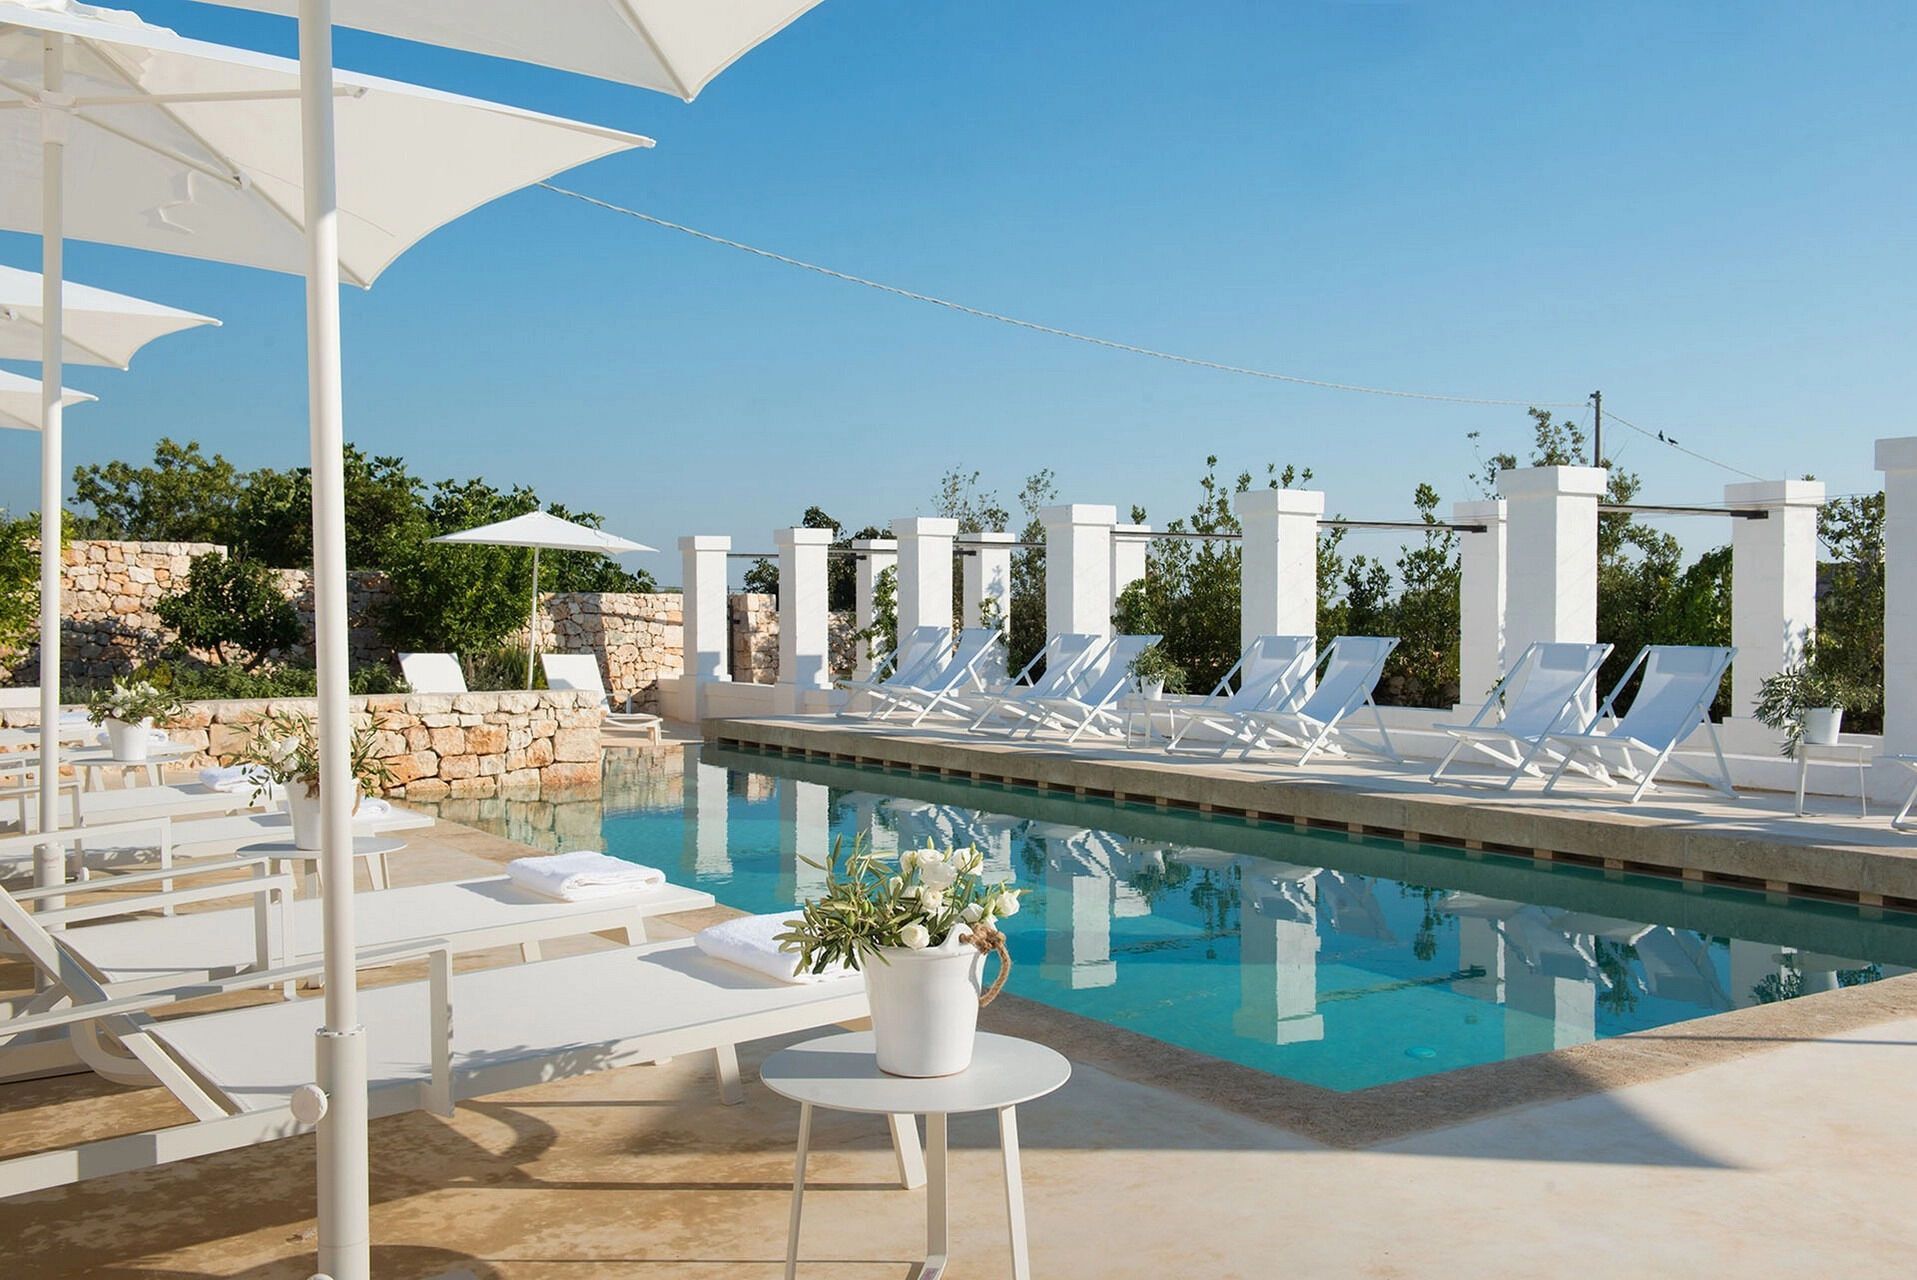 Best hotels in Puglia, Italy: Top 20 options to enjoy a drink on the "heel"